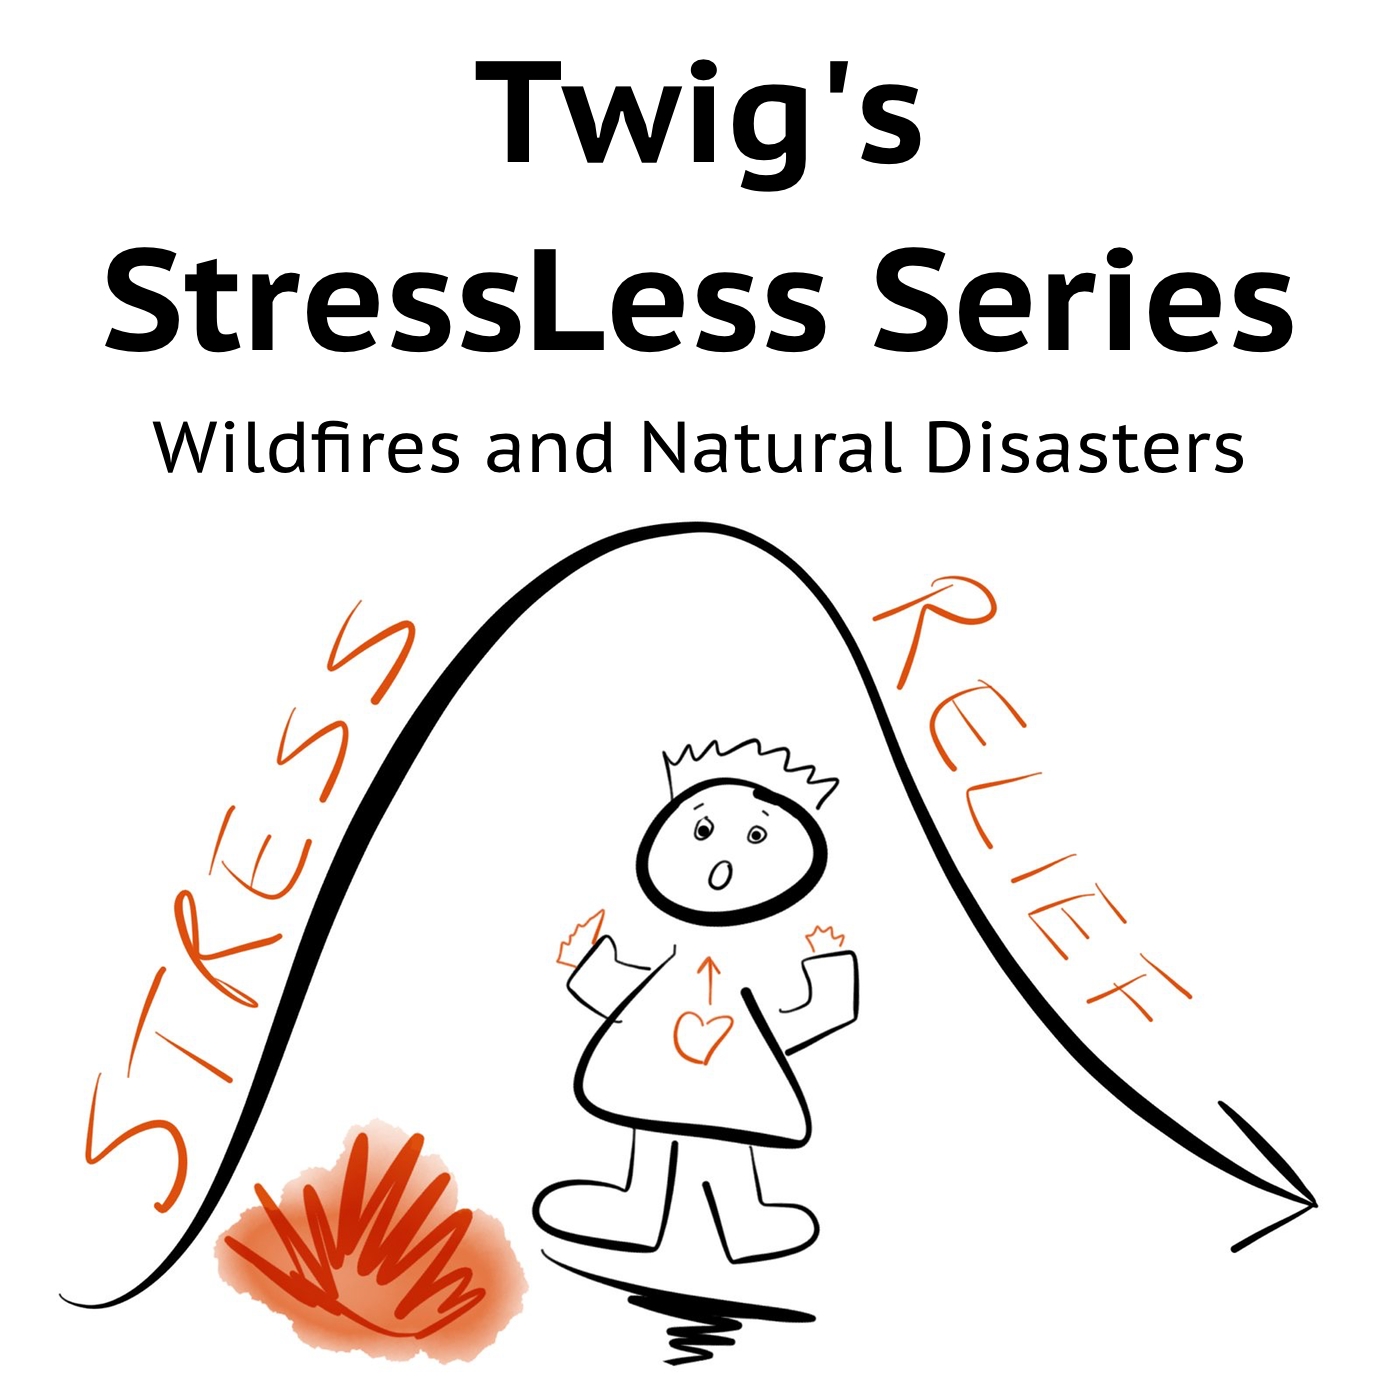 Twig's StressLess Guide for Wildfires and Other Natural Disasters